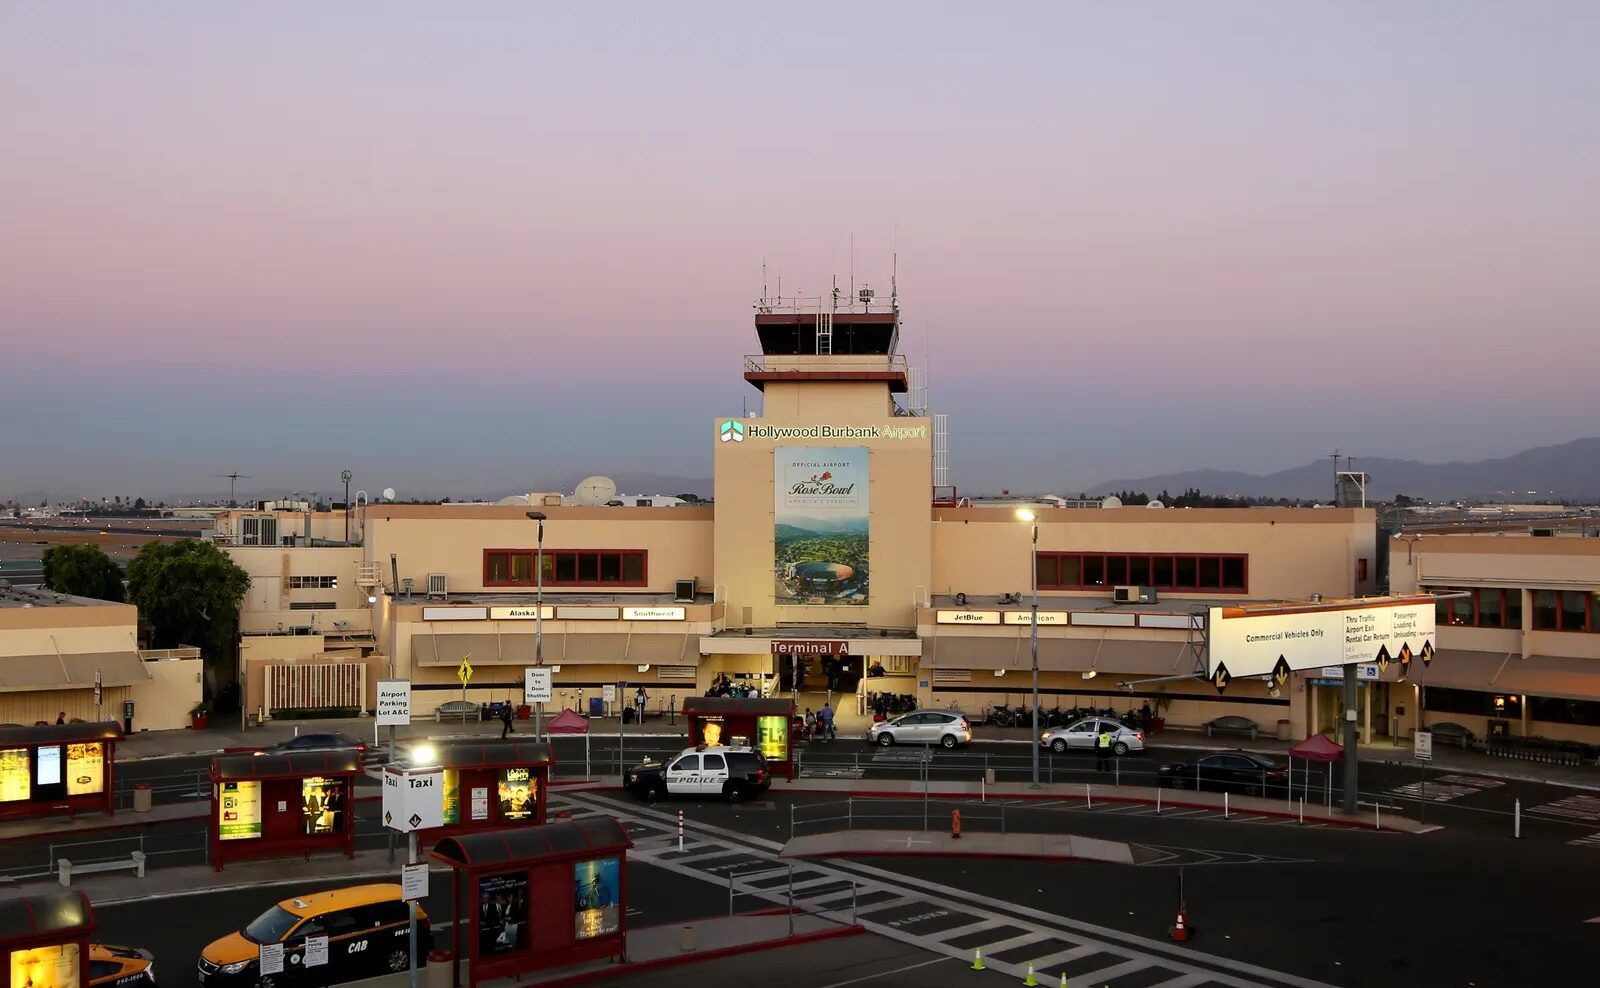 Image of Hollywood Burbank airport